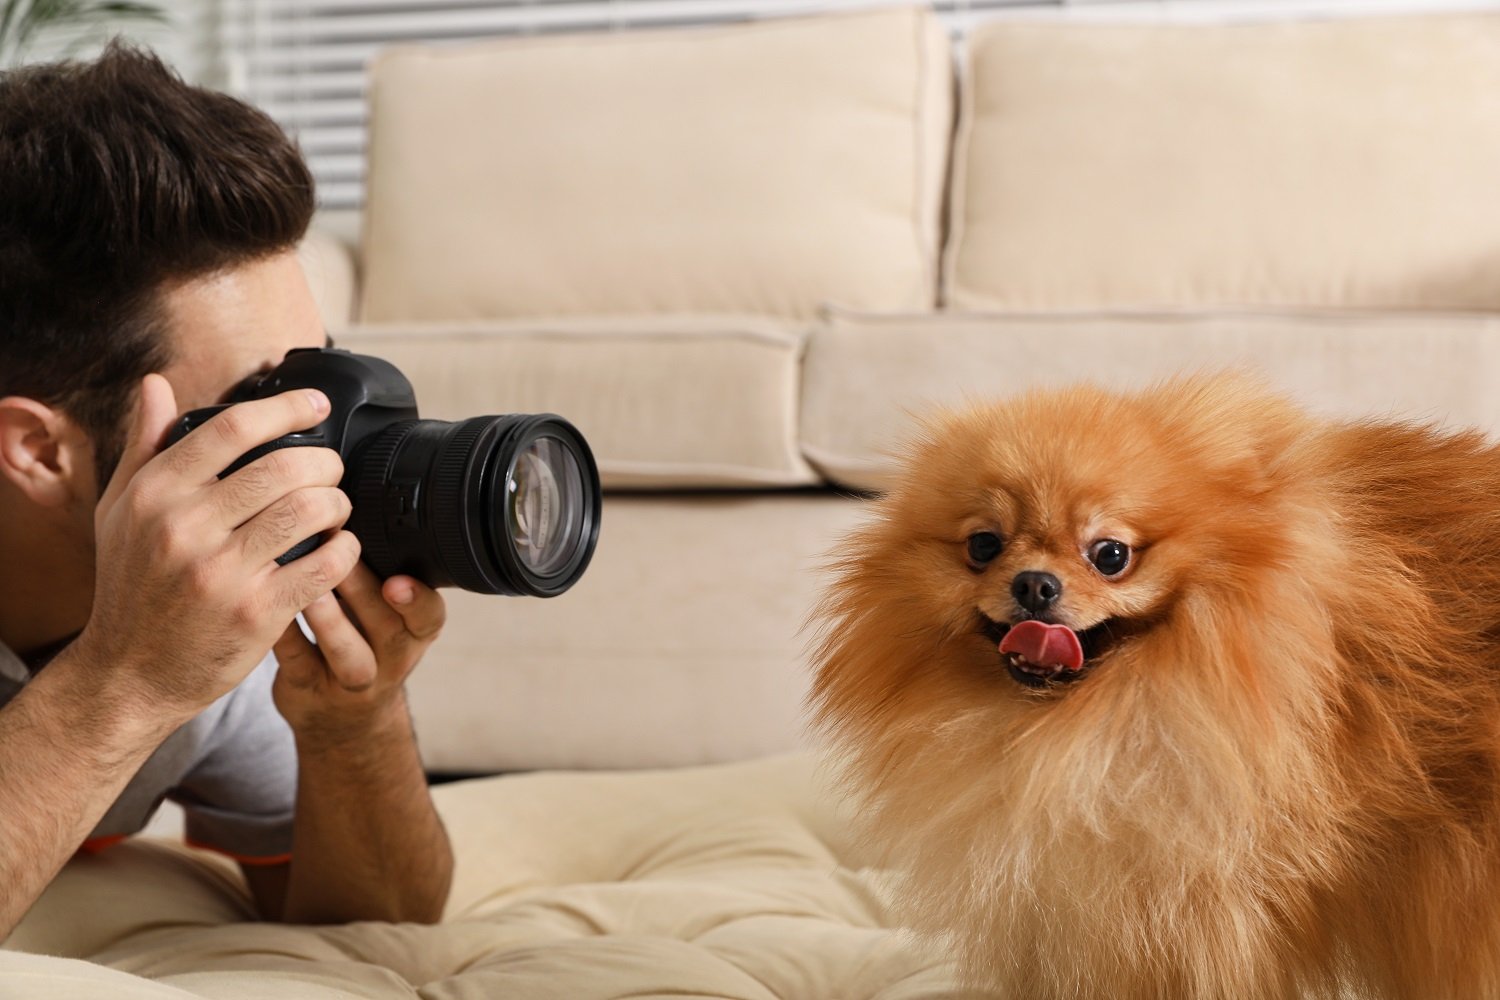 Shoot At Home: 5 Dog And Owner PhotoShoot Photography Ideas You Can Shoot At Home